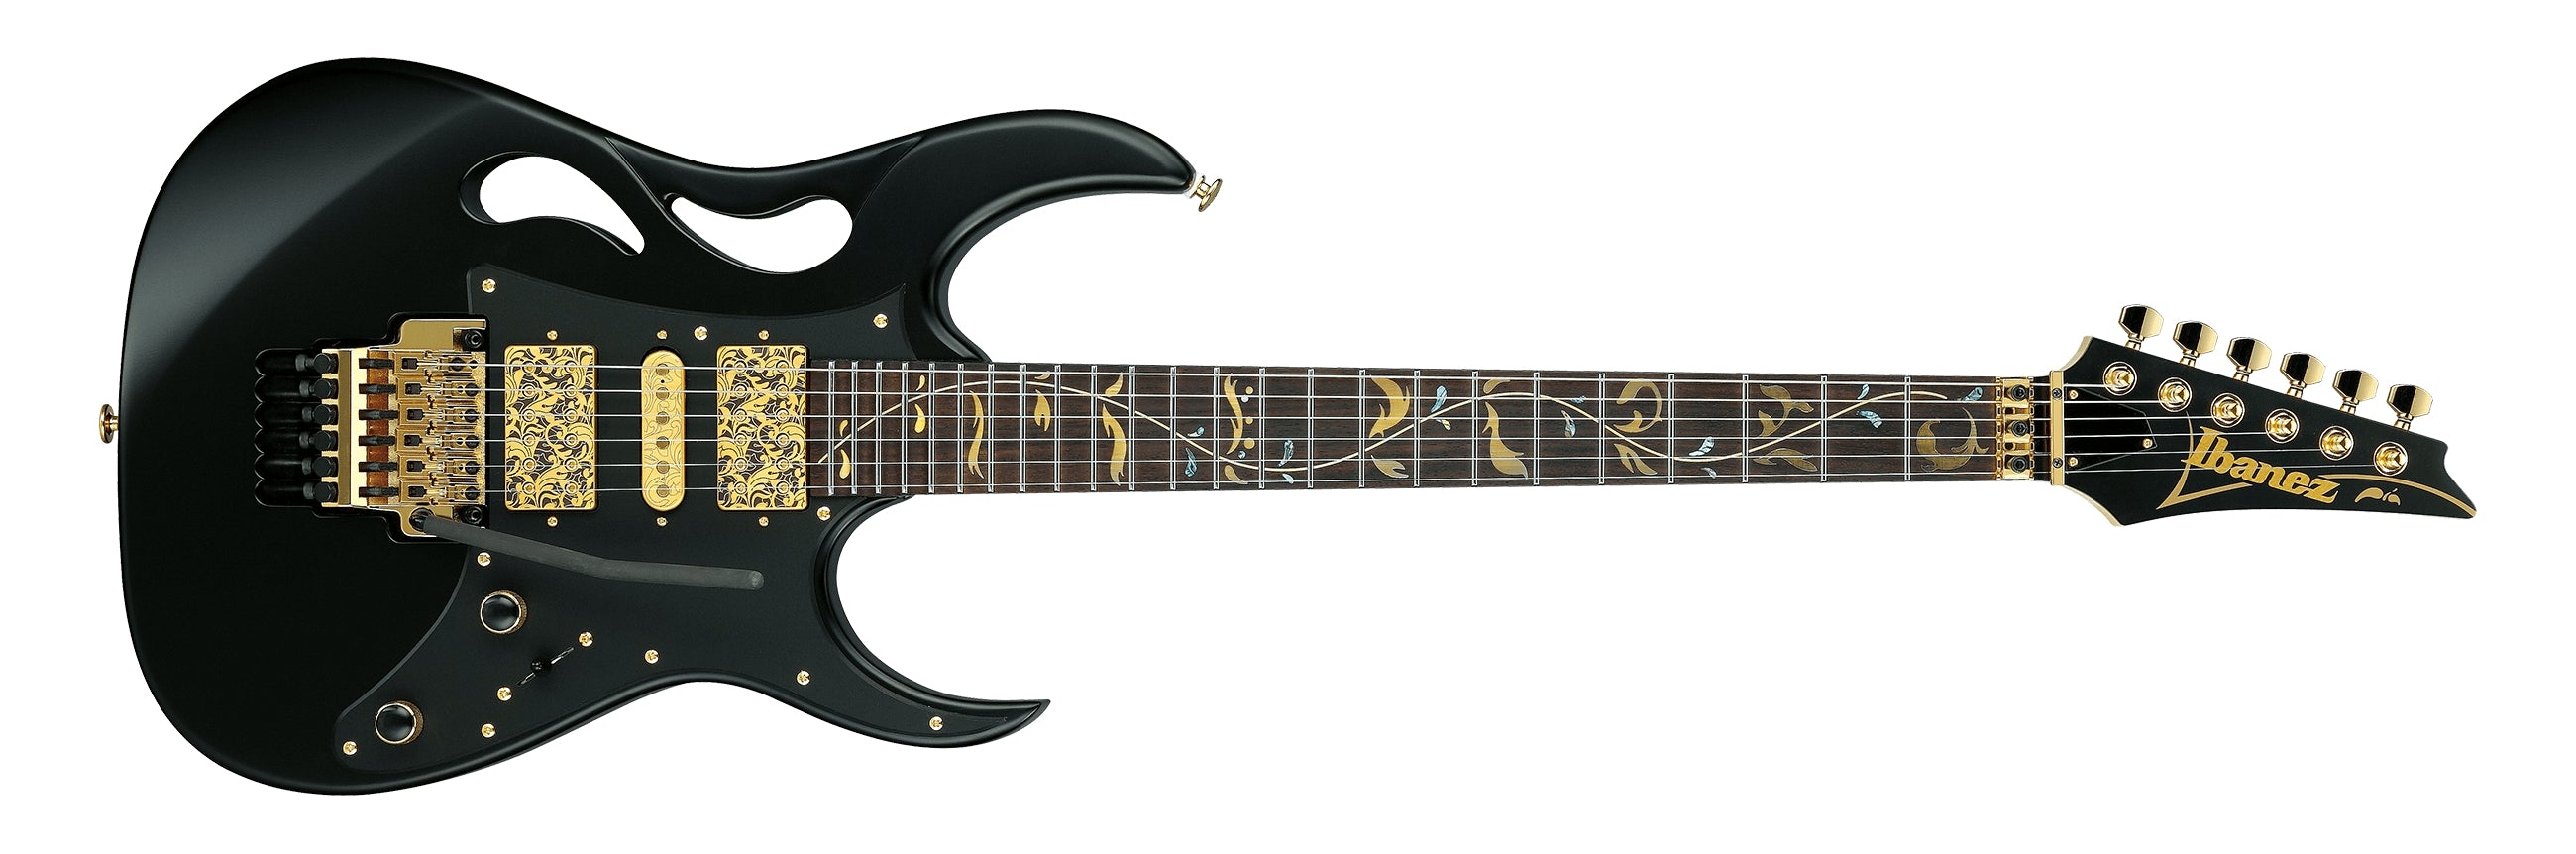 Ibanez PIA3761XB Steve Vai Signature MADE IN JAPAN Electric Guitar with Edge Tremolo - Onyx Black